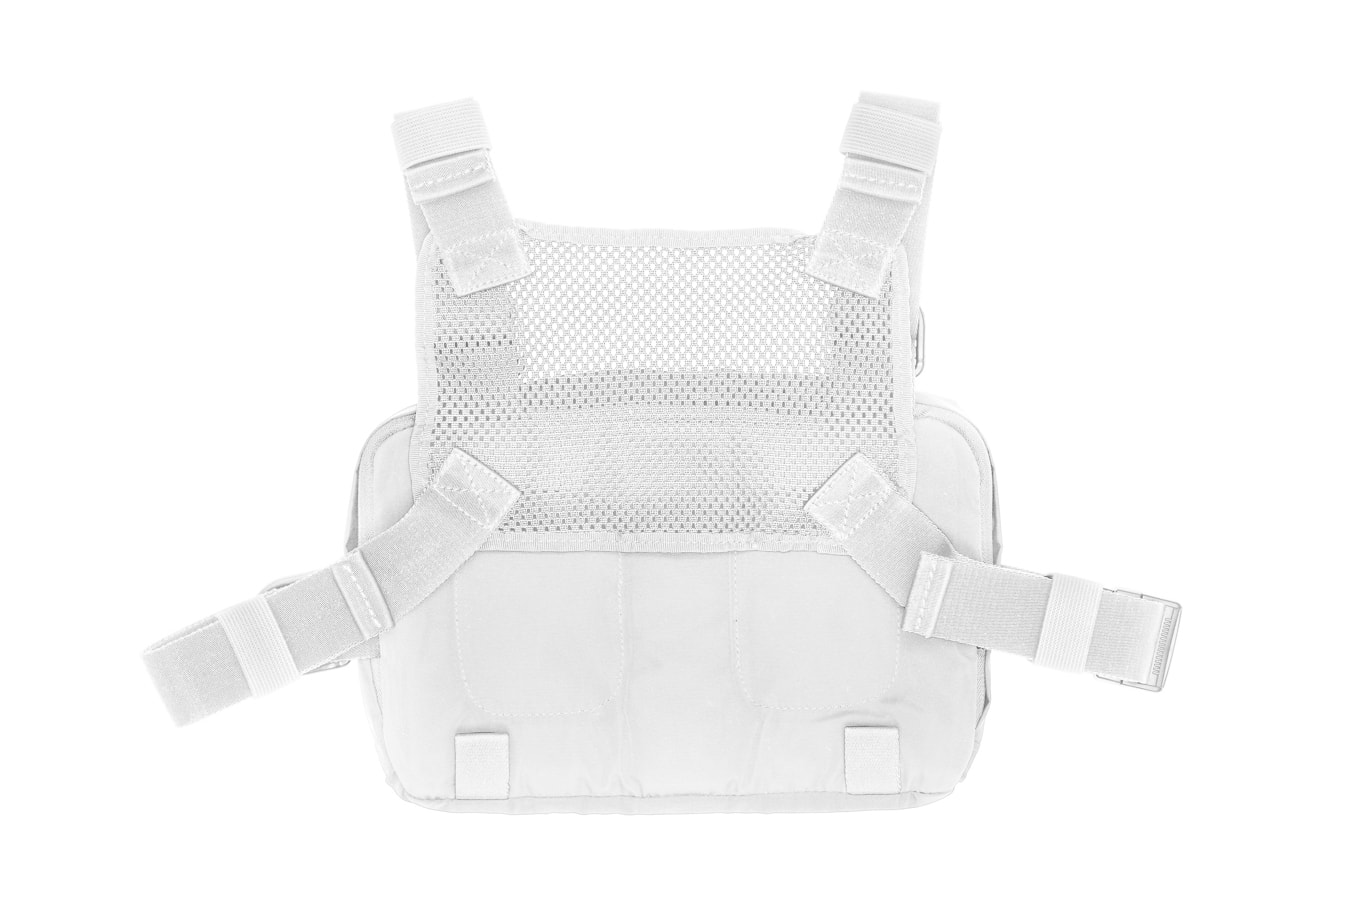 ALYX Chest Rigs Are Now Available for Pre-Order | Hypebeast